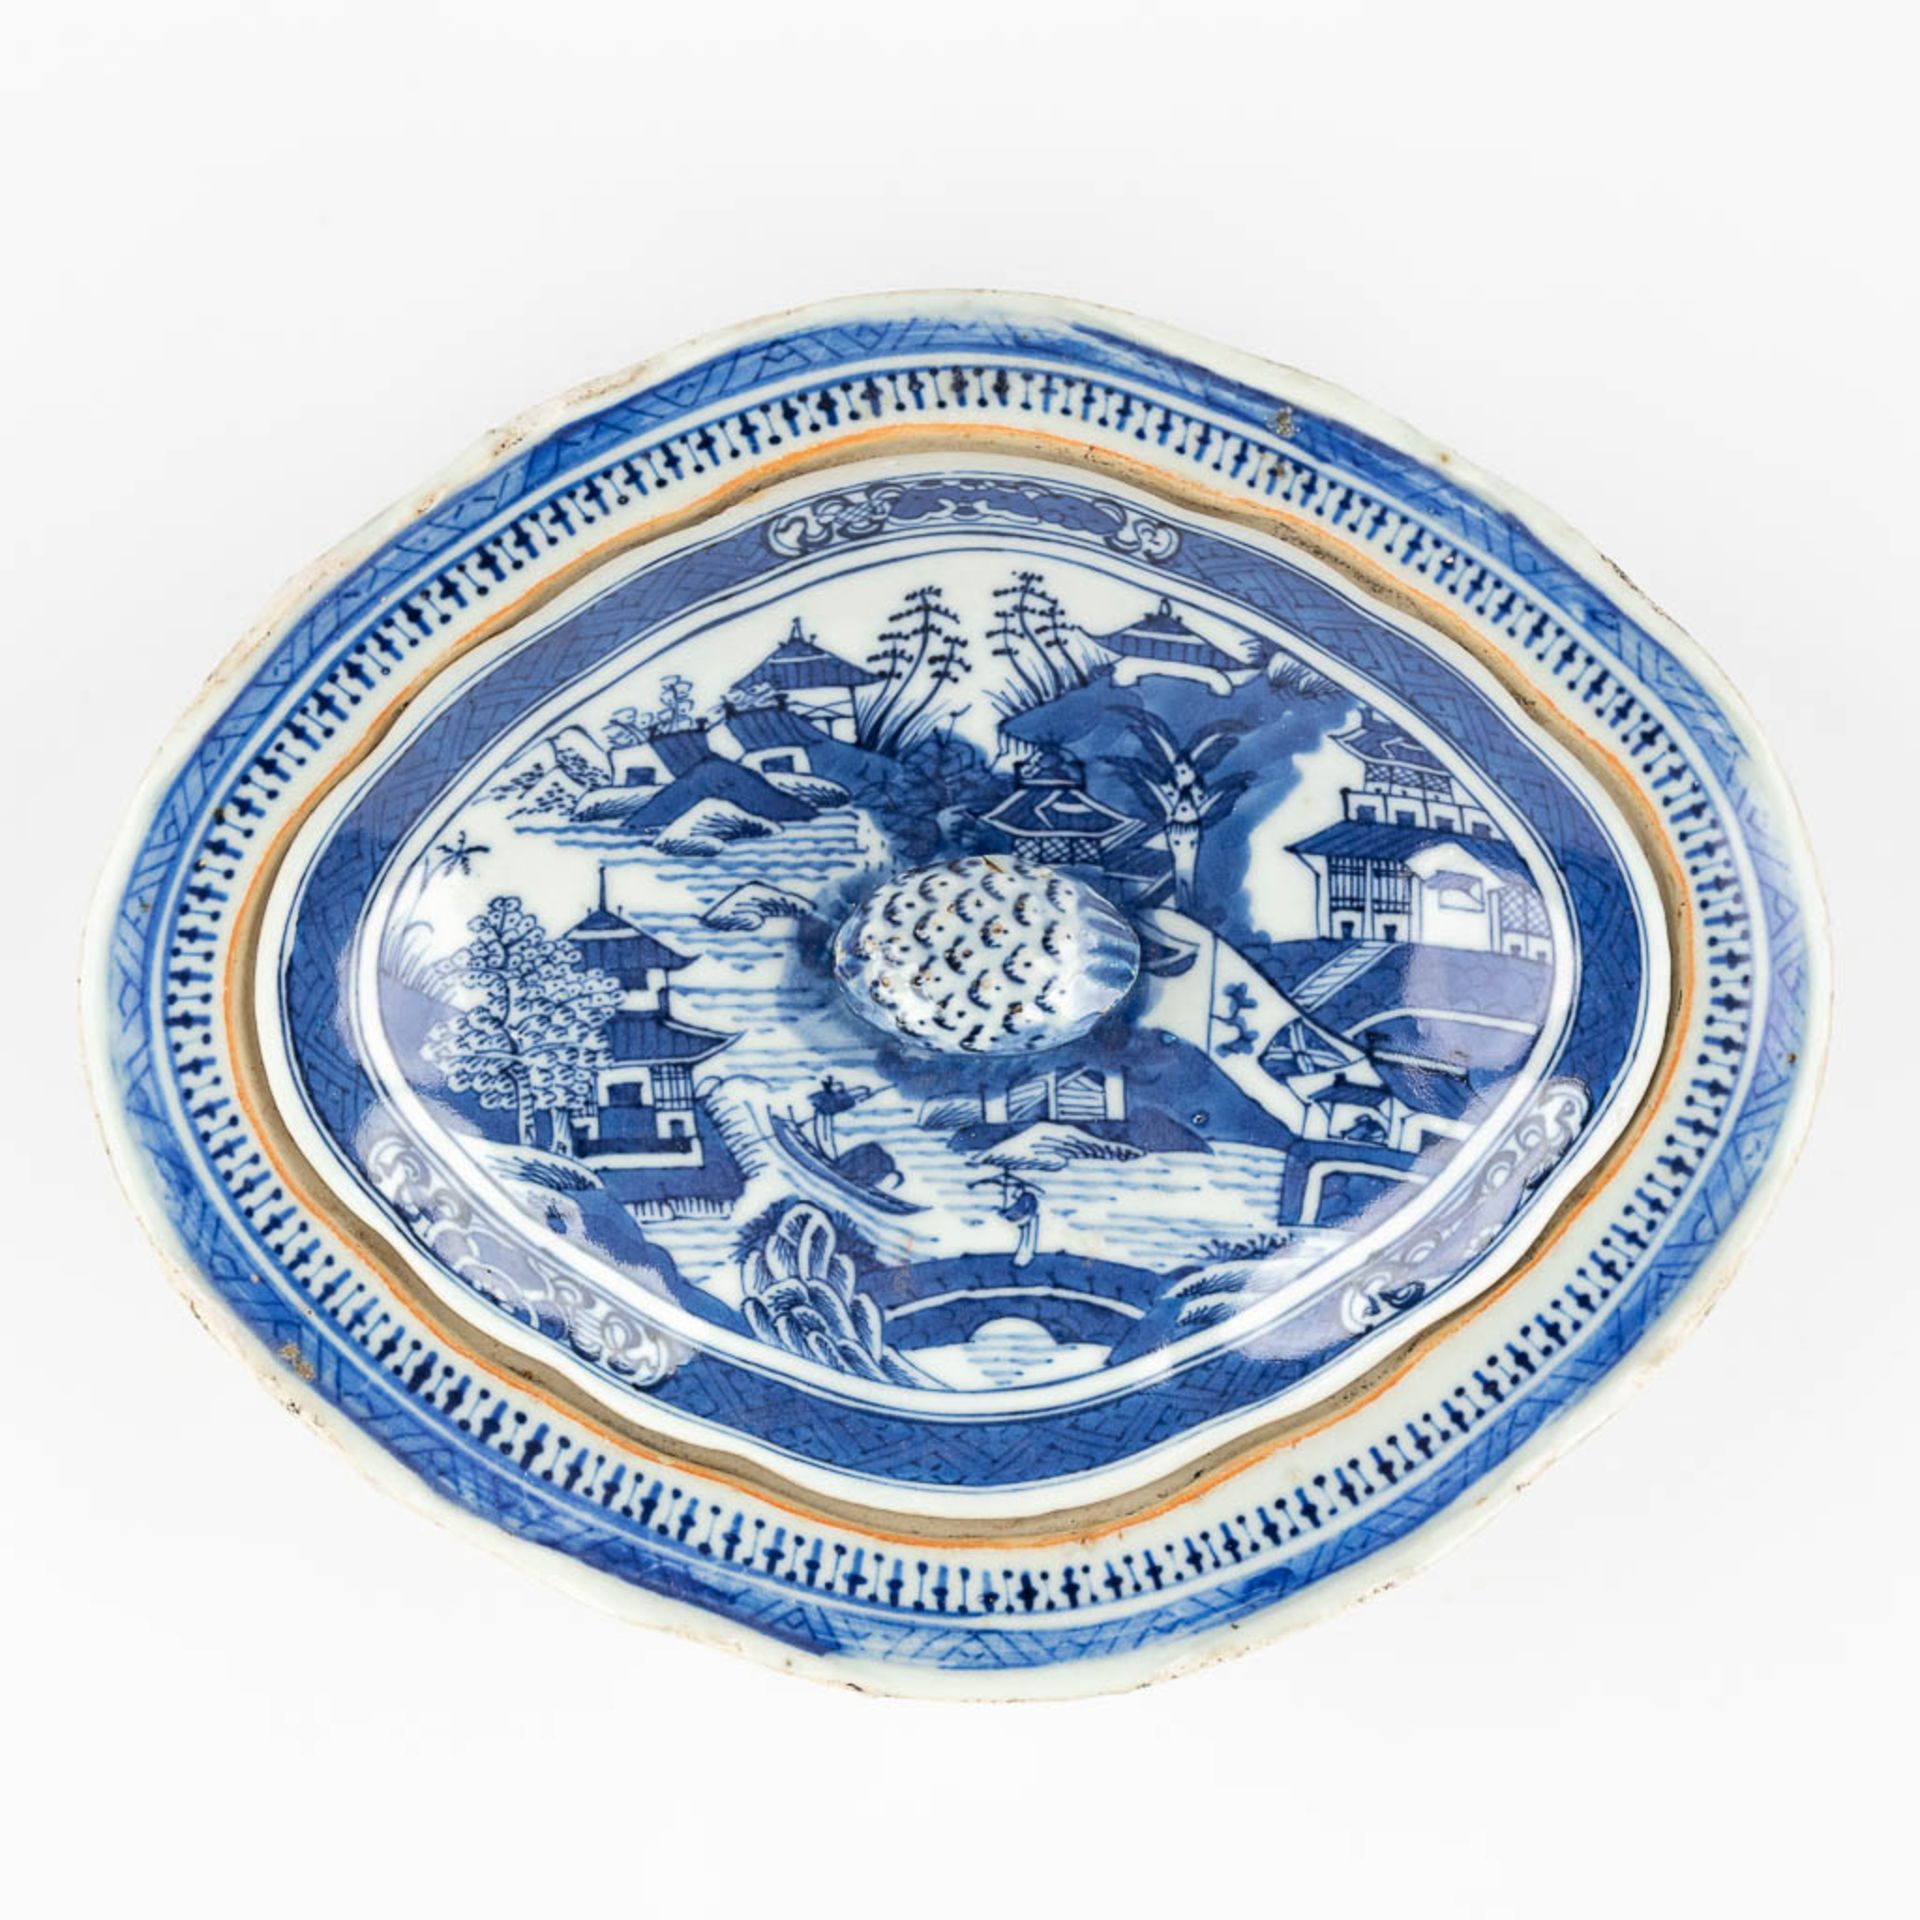 A Chinese bowl with a lid and blue-white landscape decor. 19th C. (L: 21,5 x W: 26,5 x H: 10 cm) - Image 7 of 15